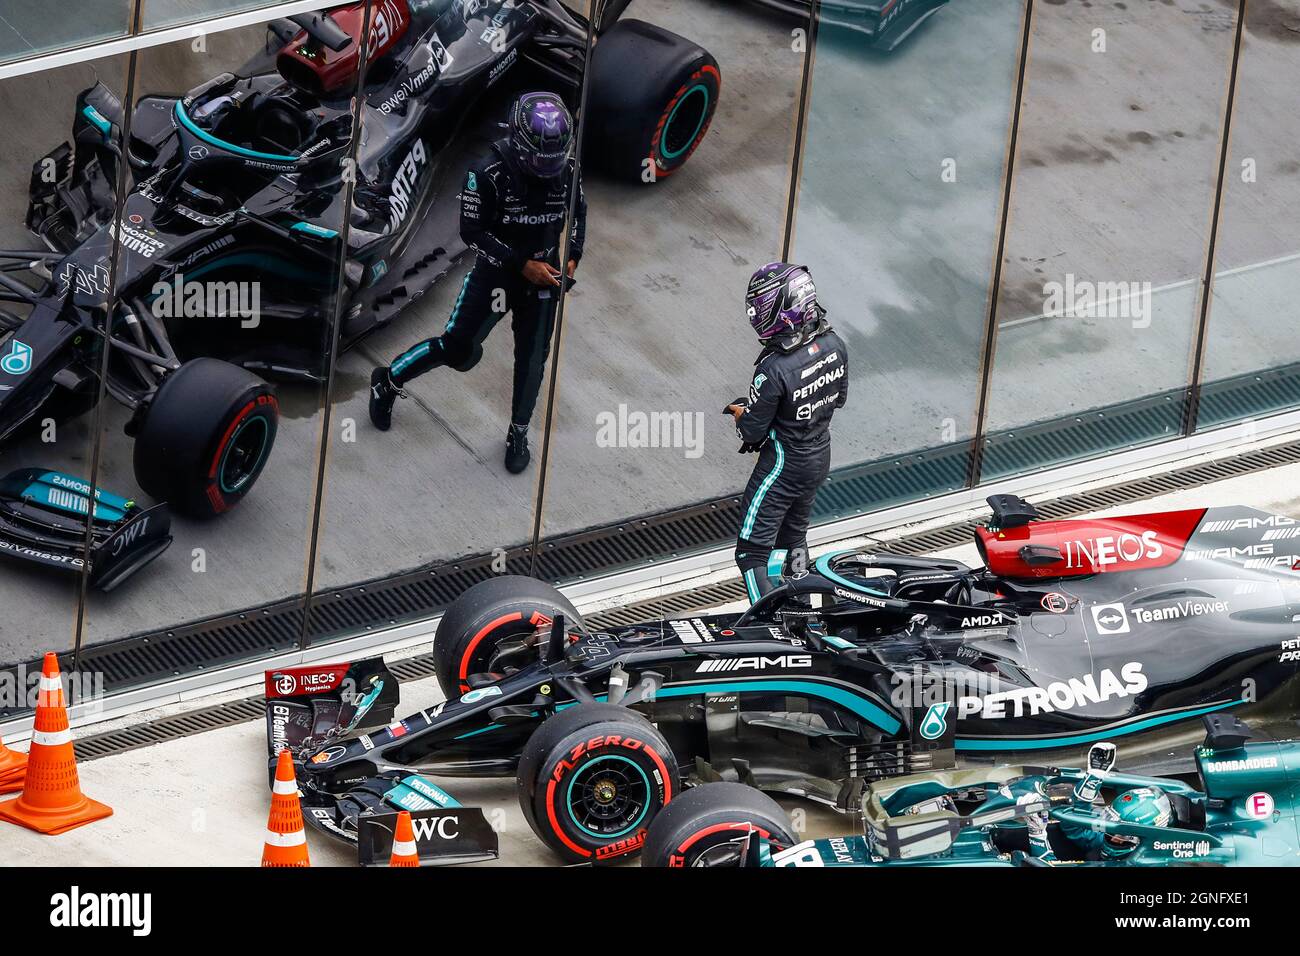 Lewis Hamilton in the pits, Mercedes AMG F1, Russian GP 2019 print by  Motorsport Images